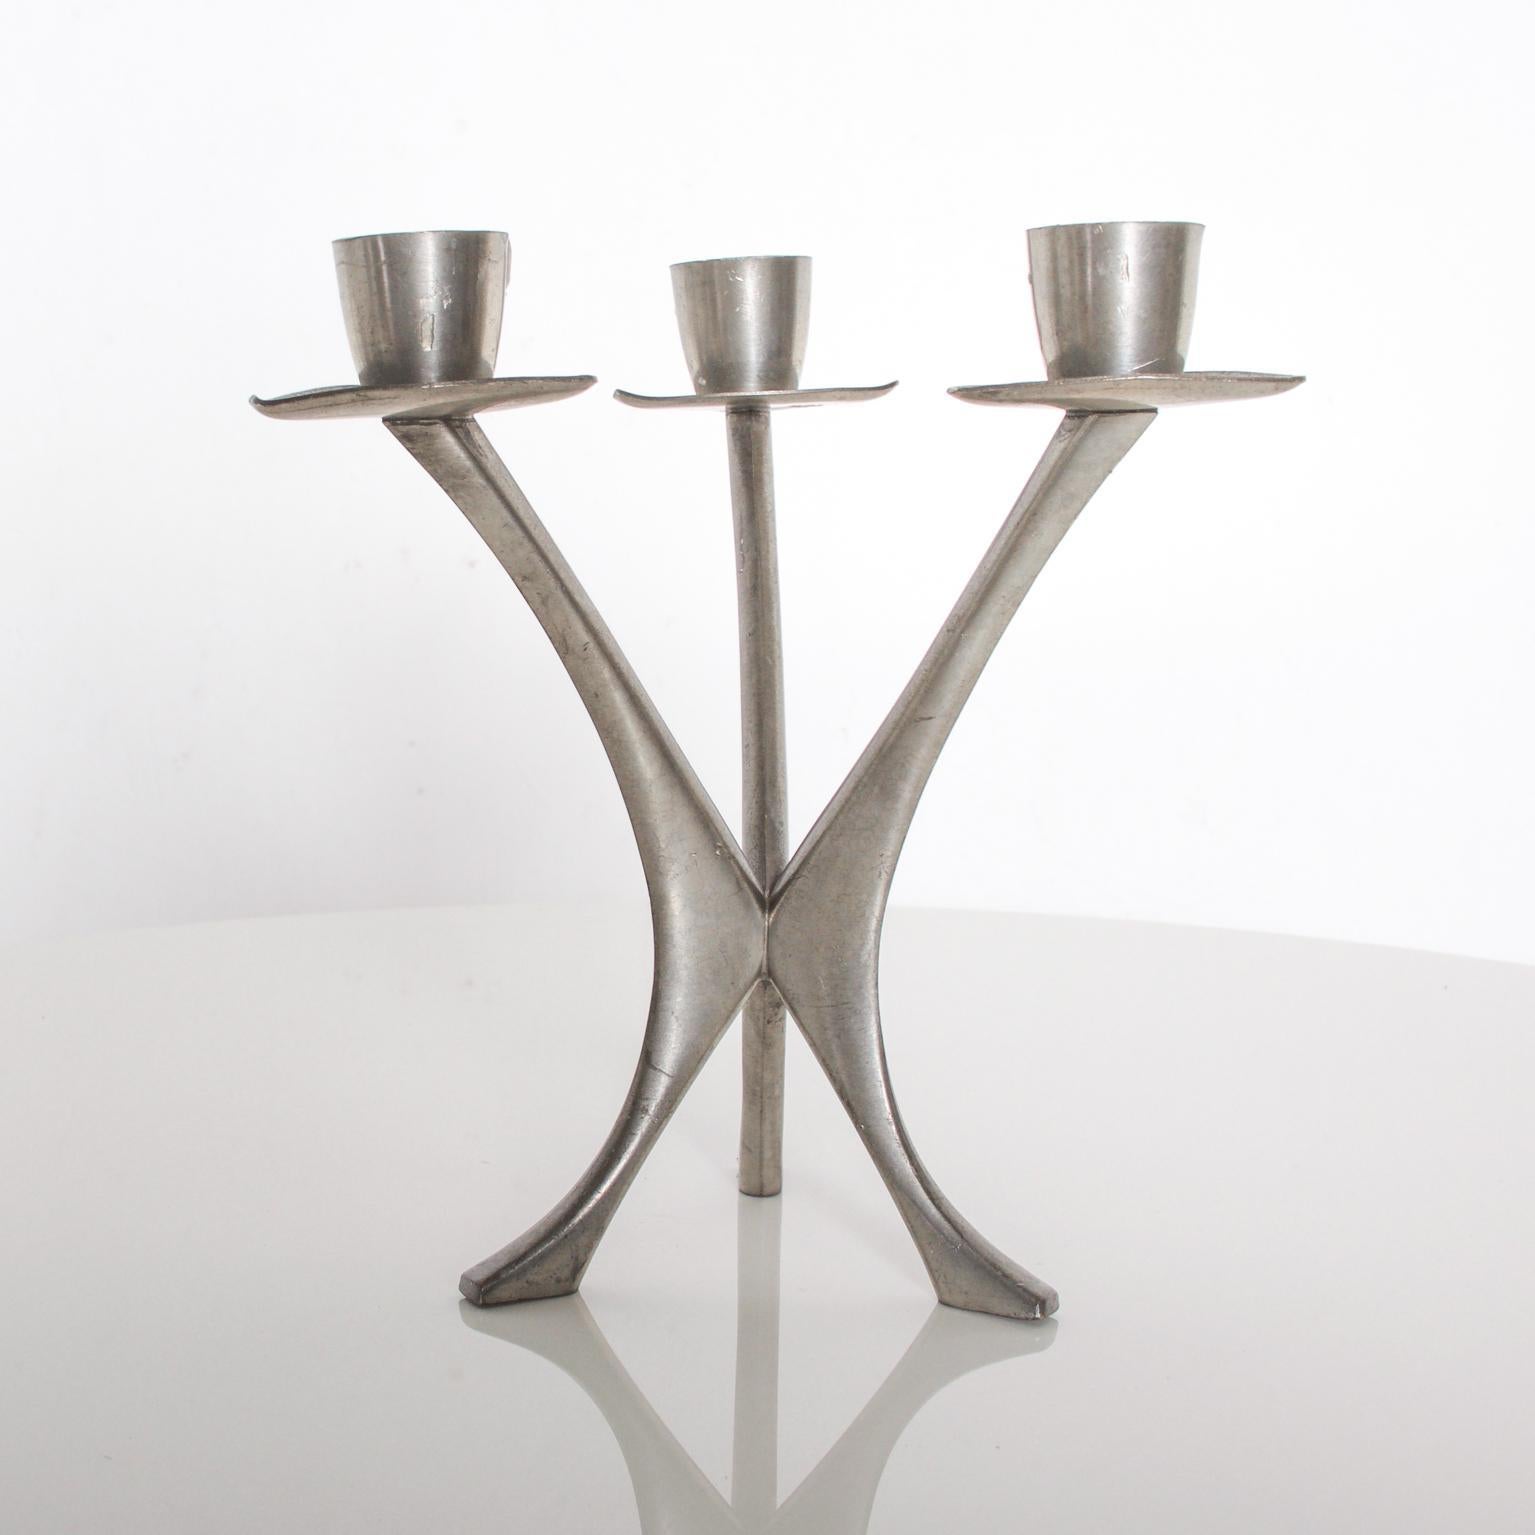 For your pleasure: Midcentury candleholder Three candle candelabra in Pewter from Norway. 
Norwegian Brodrene Mylius Pewter, BM Pewter, stamped by maker. 
Dimensions: 6 1/2